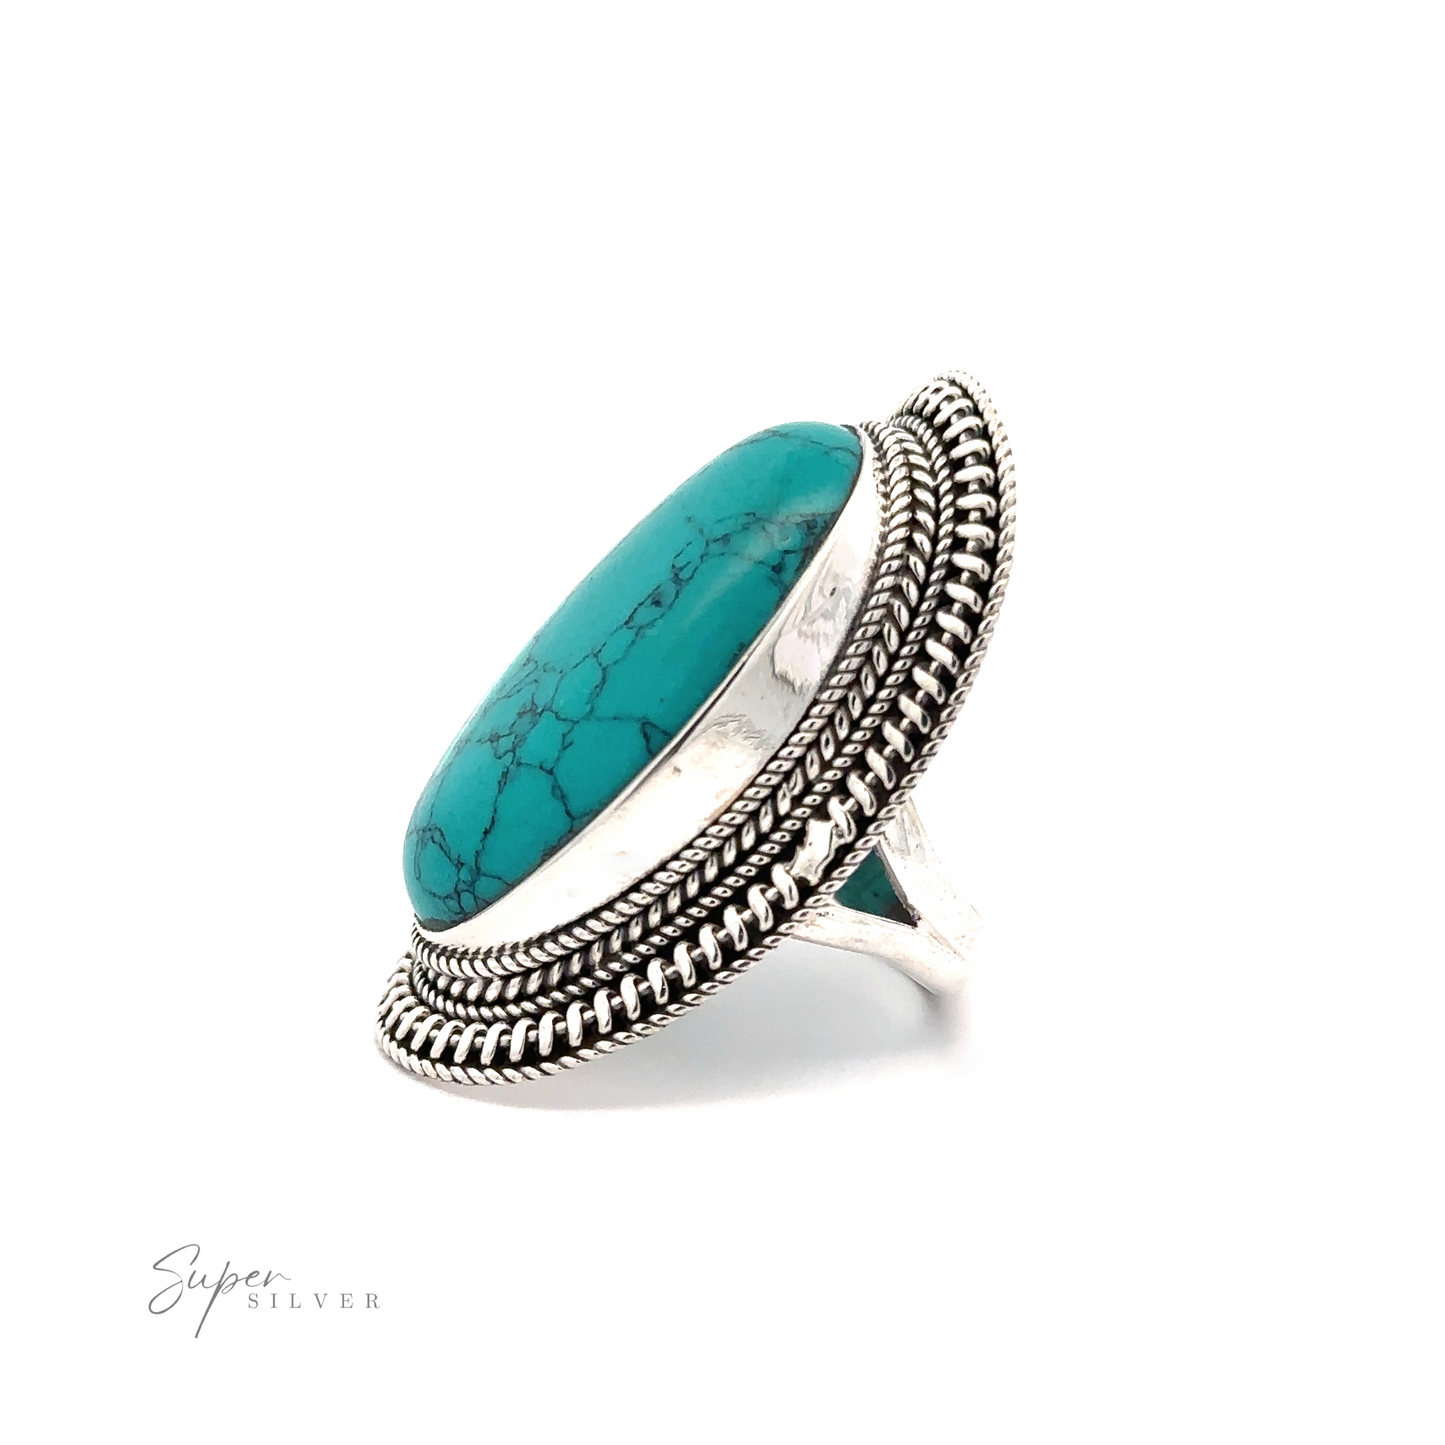 
                  
                    Large Oval Shield Gemstone Ring. The ring features intricate detailing around the stone, adding a touch of bohemian flair. The brand "Super Silver" is visible in the lower left corner.
                  
                